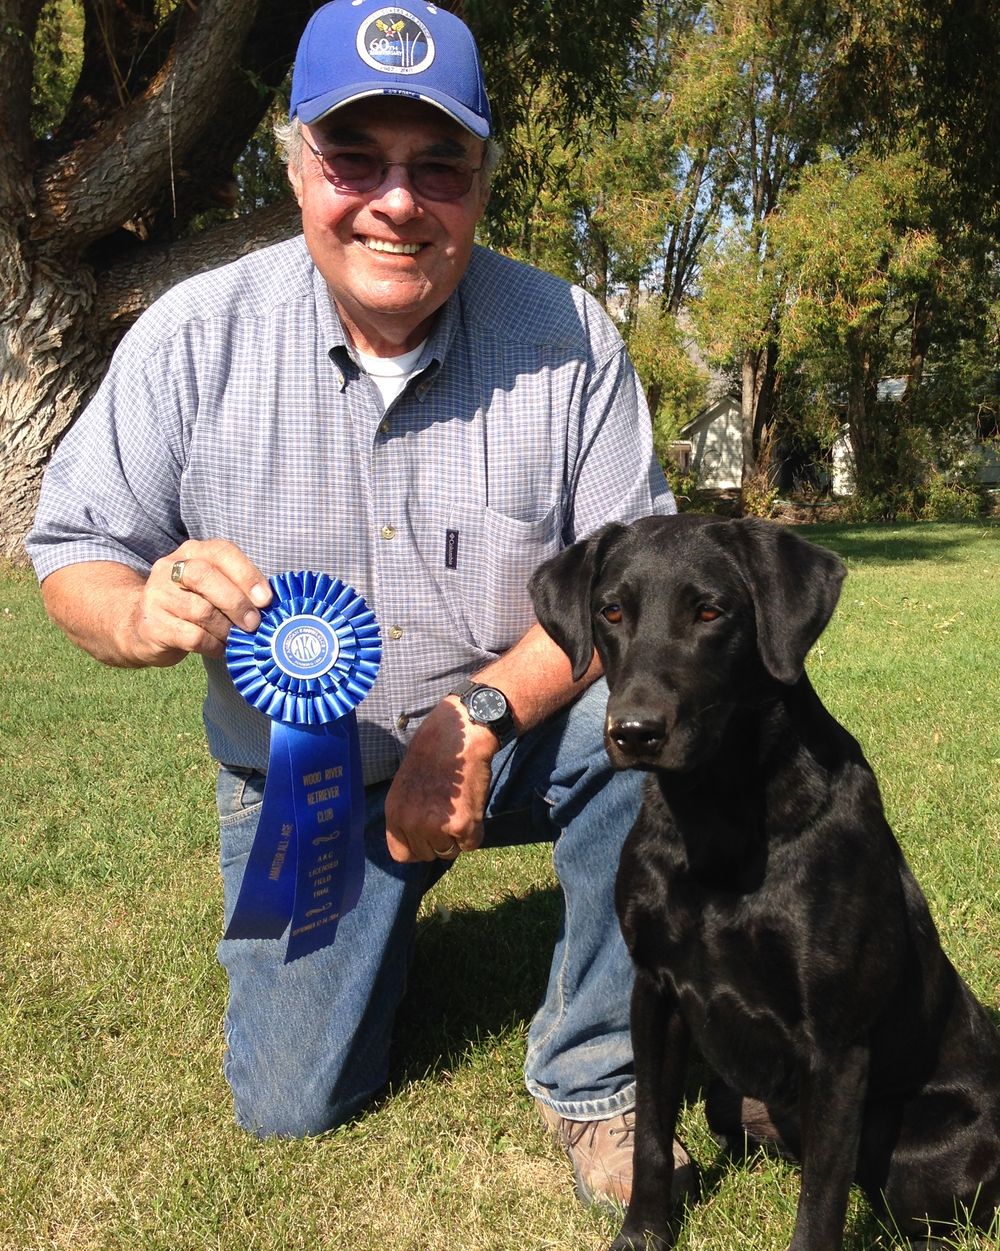 Mike Tierney wins the Amateur with our U.S. Labrador in Sun Valley, ID